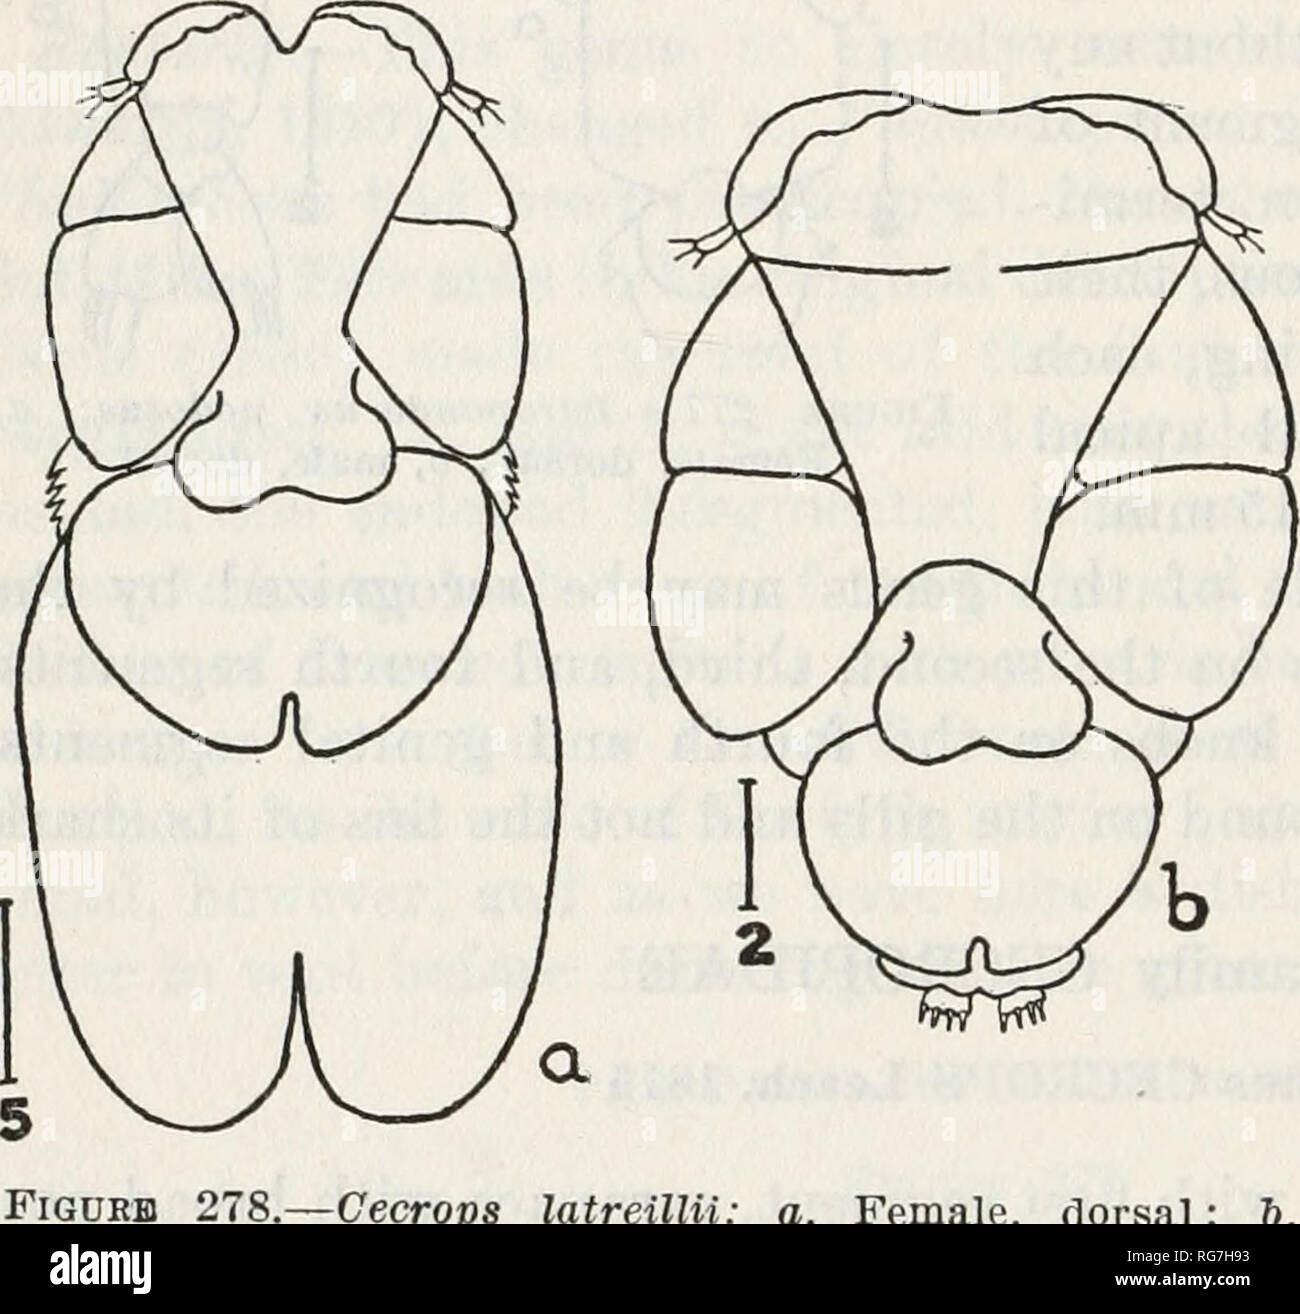 Bulletin - United States National Museum. Science. 442 BULLETIN 15 8,  UNITED STATES NATIONAL MUSEUM mer without dorsal plates, the latter without  ventral lobes, and twice as wide as long; legs